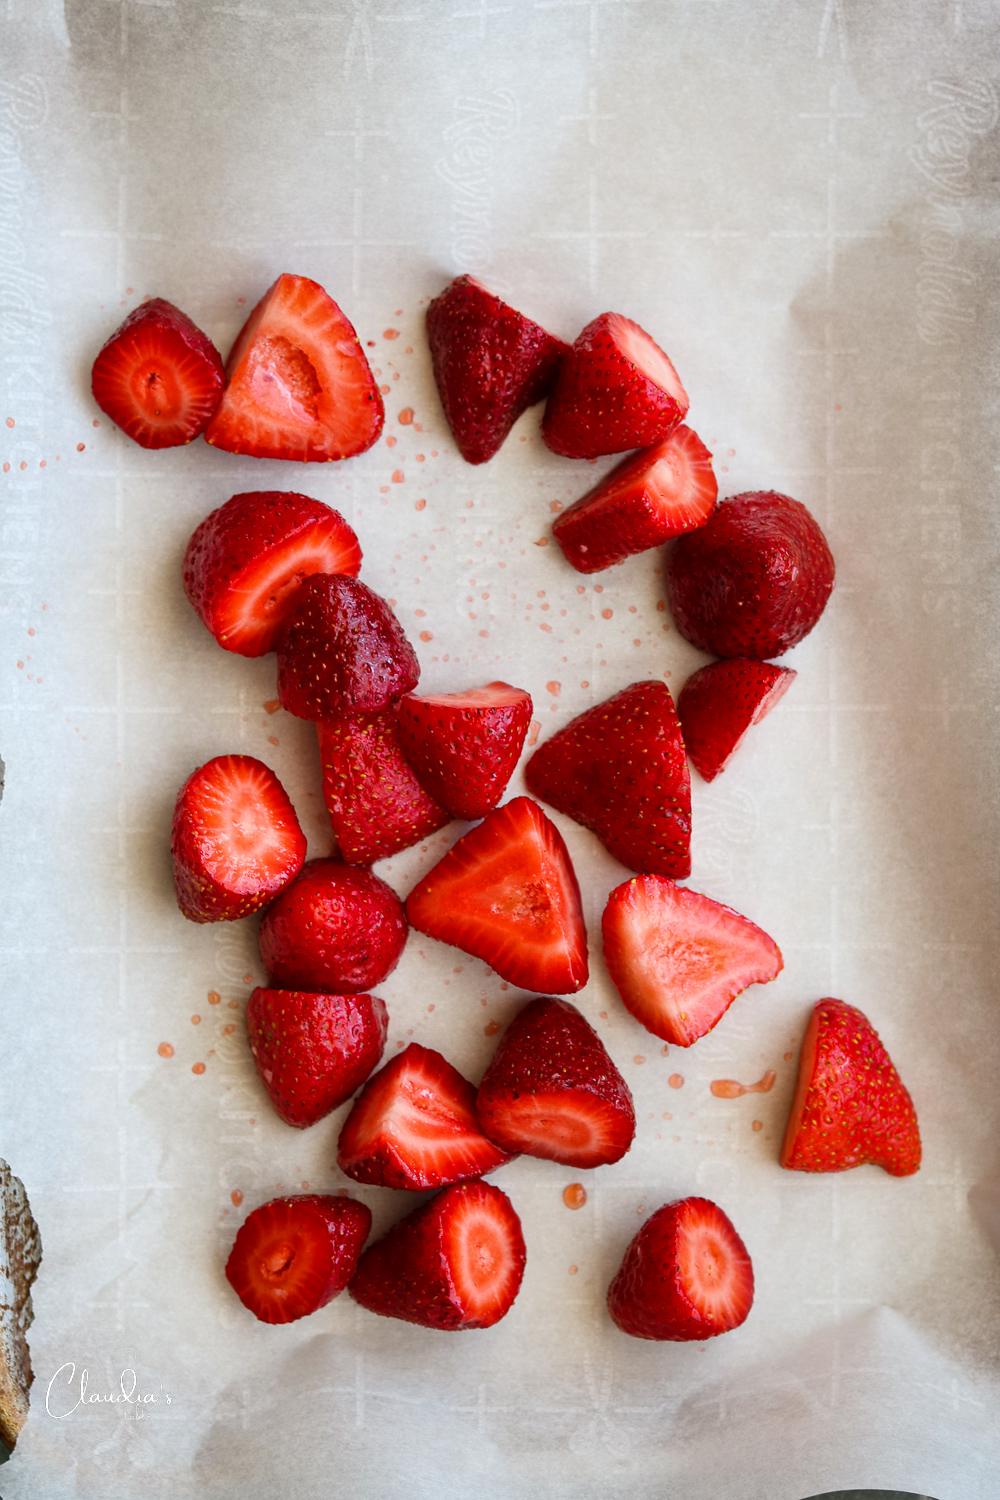 Roasted strawberries for 25 minutes